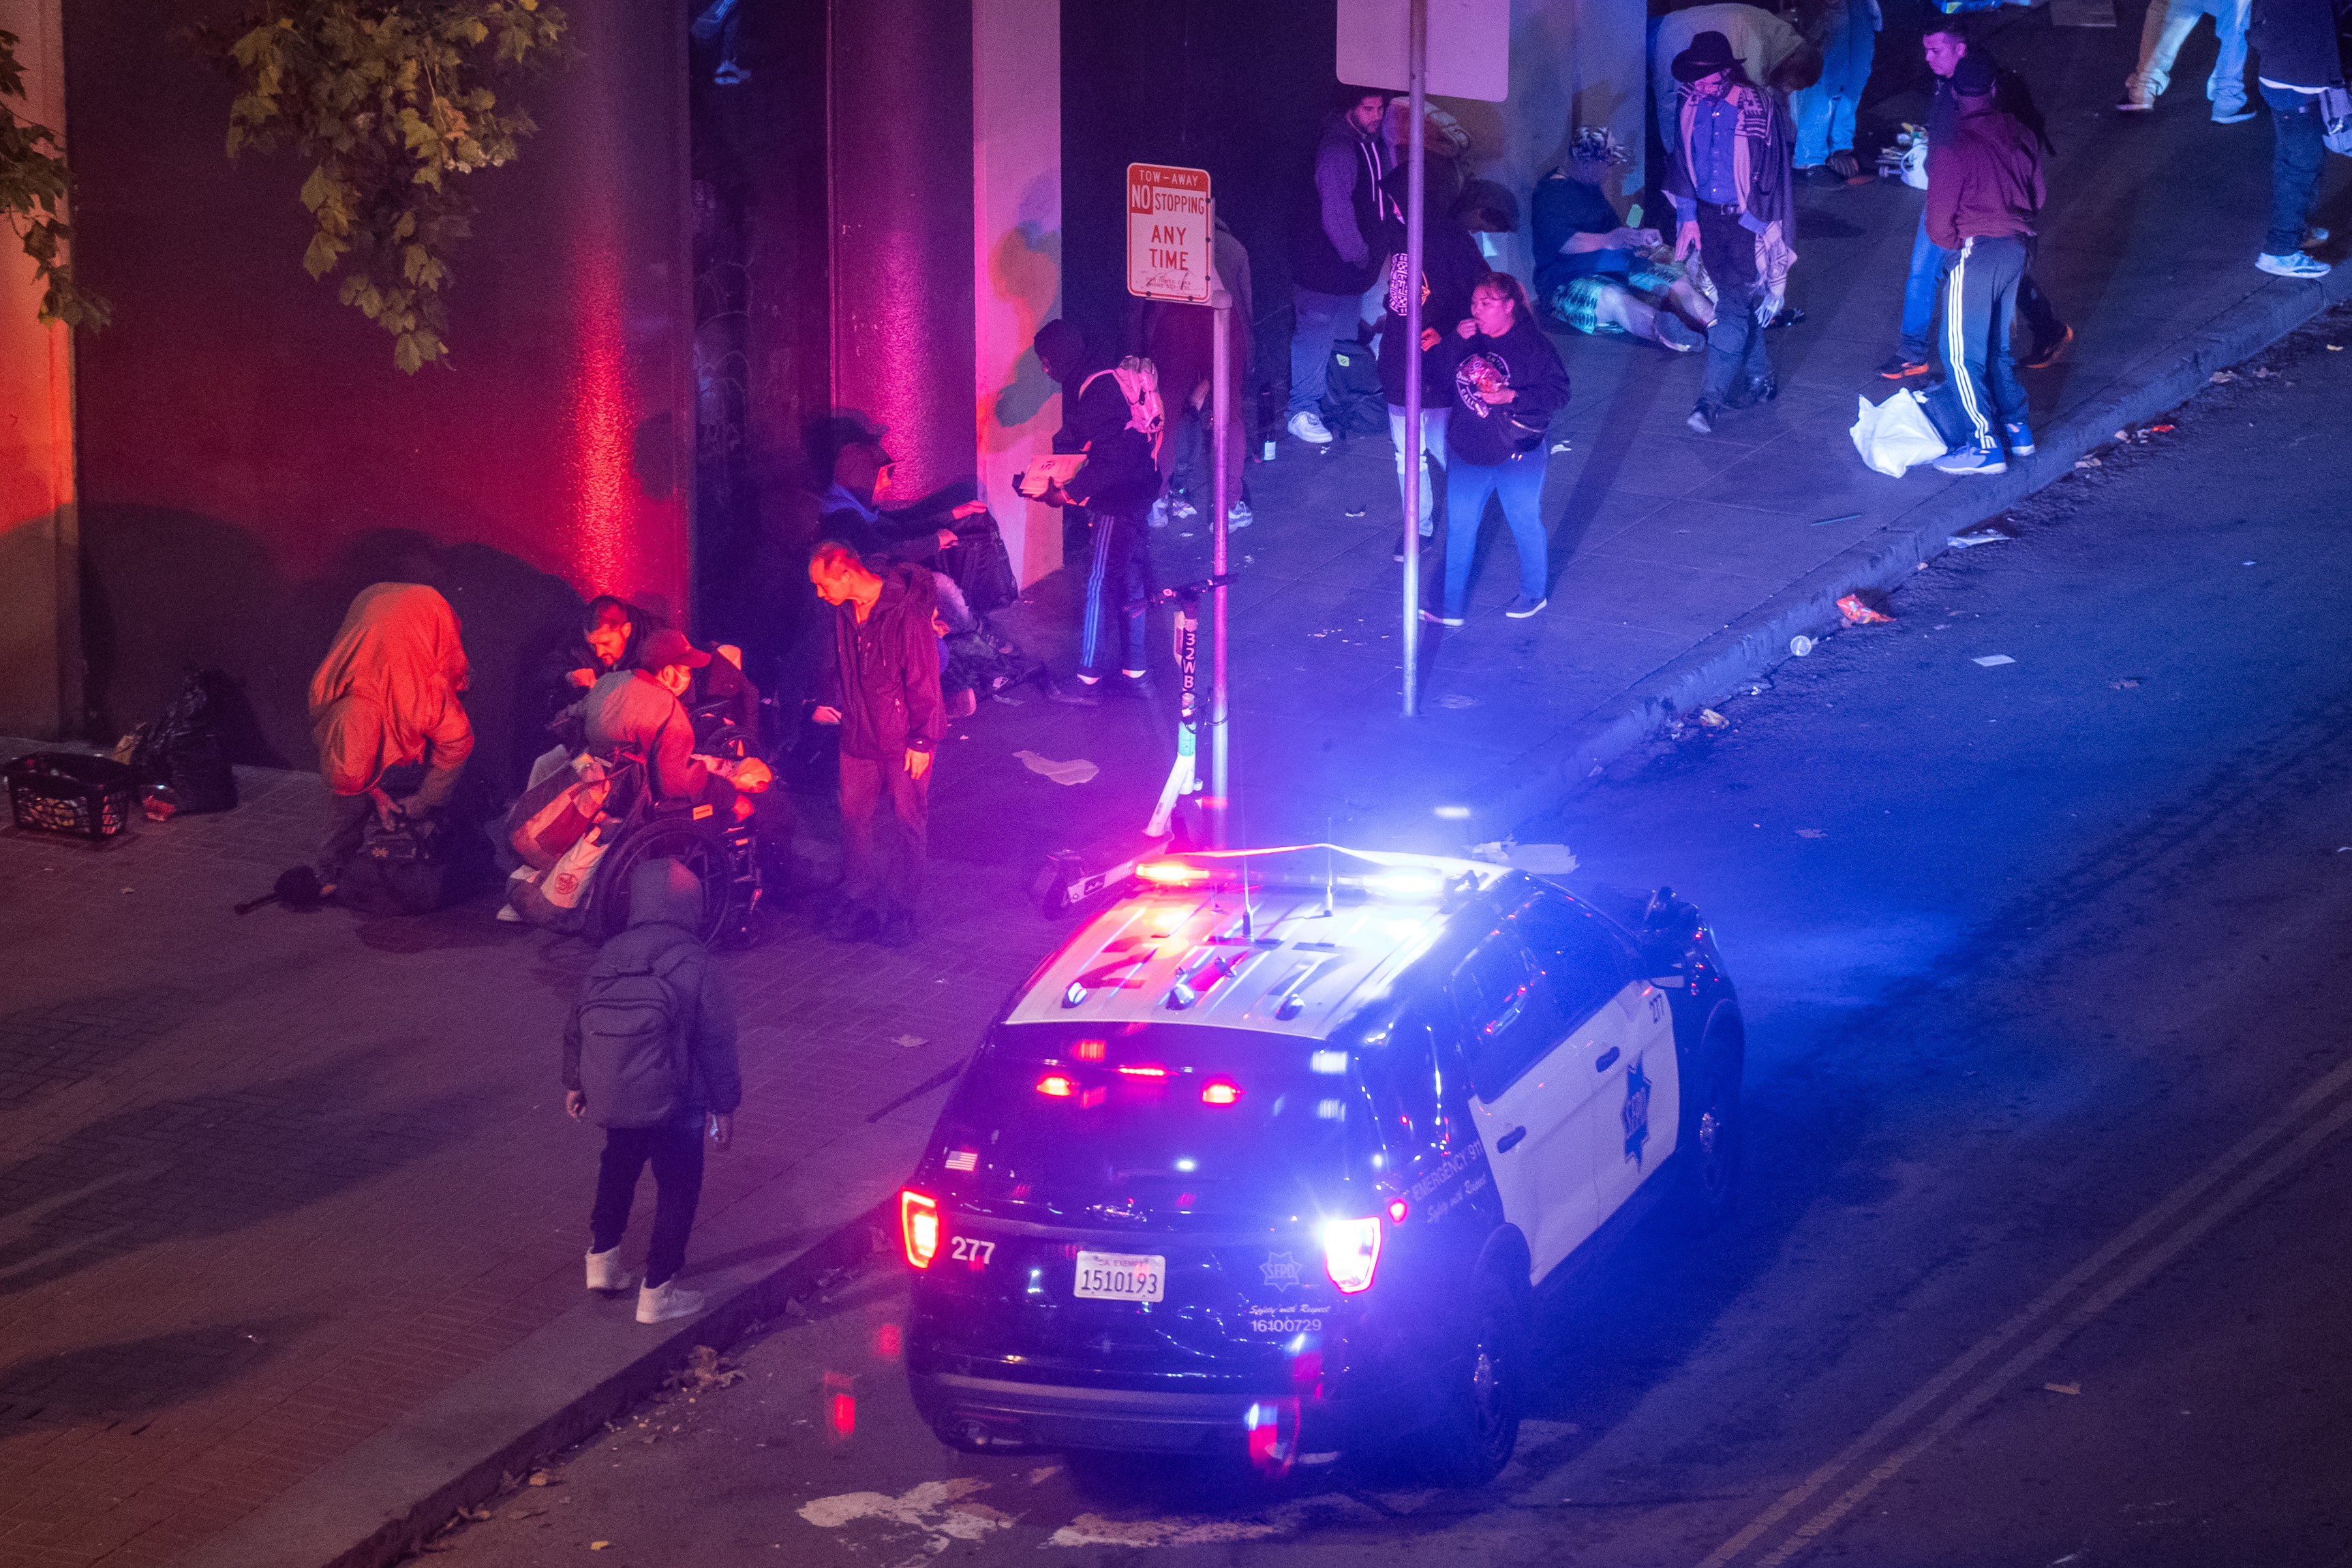 A police car shines its lights next to a crowd of people.